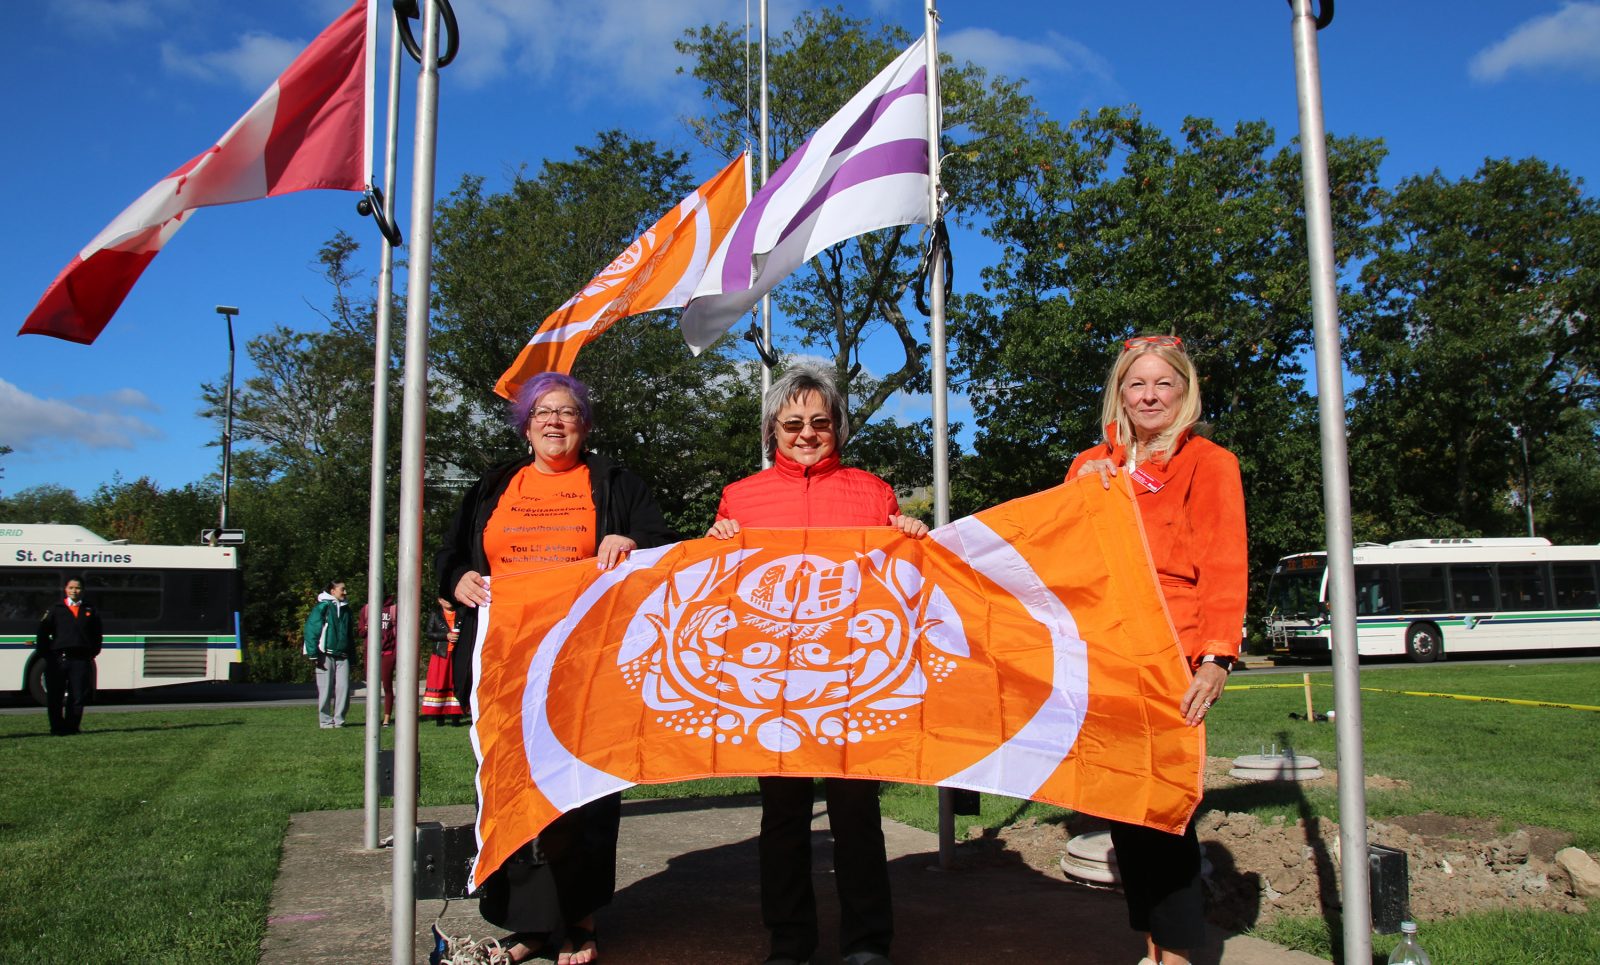 Two women in orange shirts and one in a red shirt stand holding an orange flag with another orange flag and a purle and white flag flying behind them.